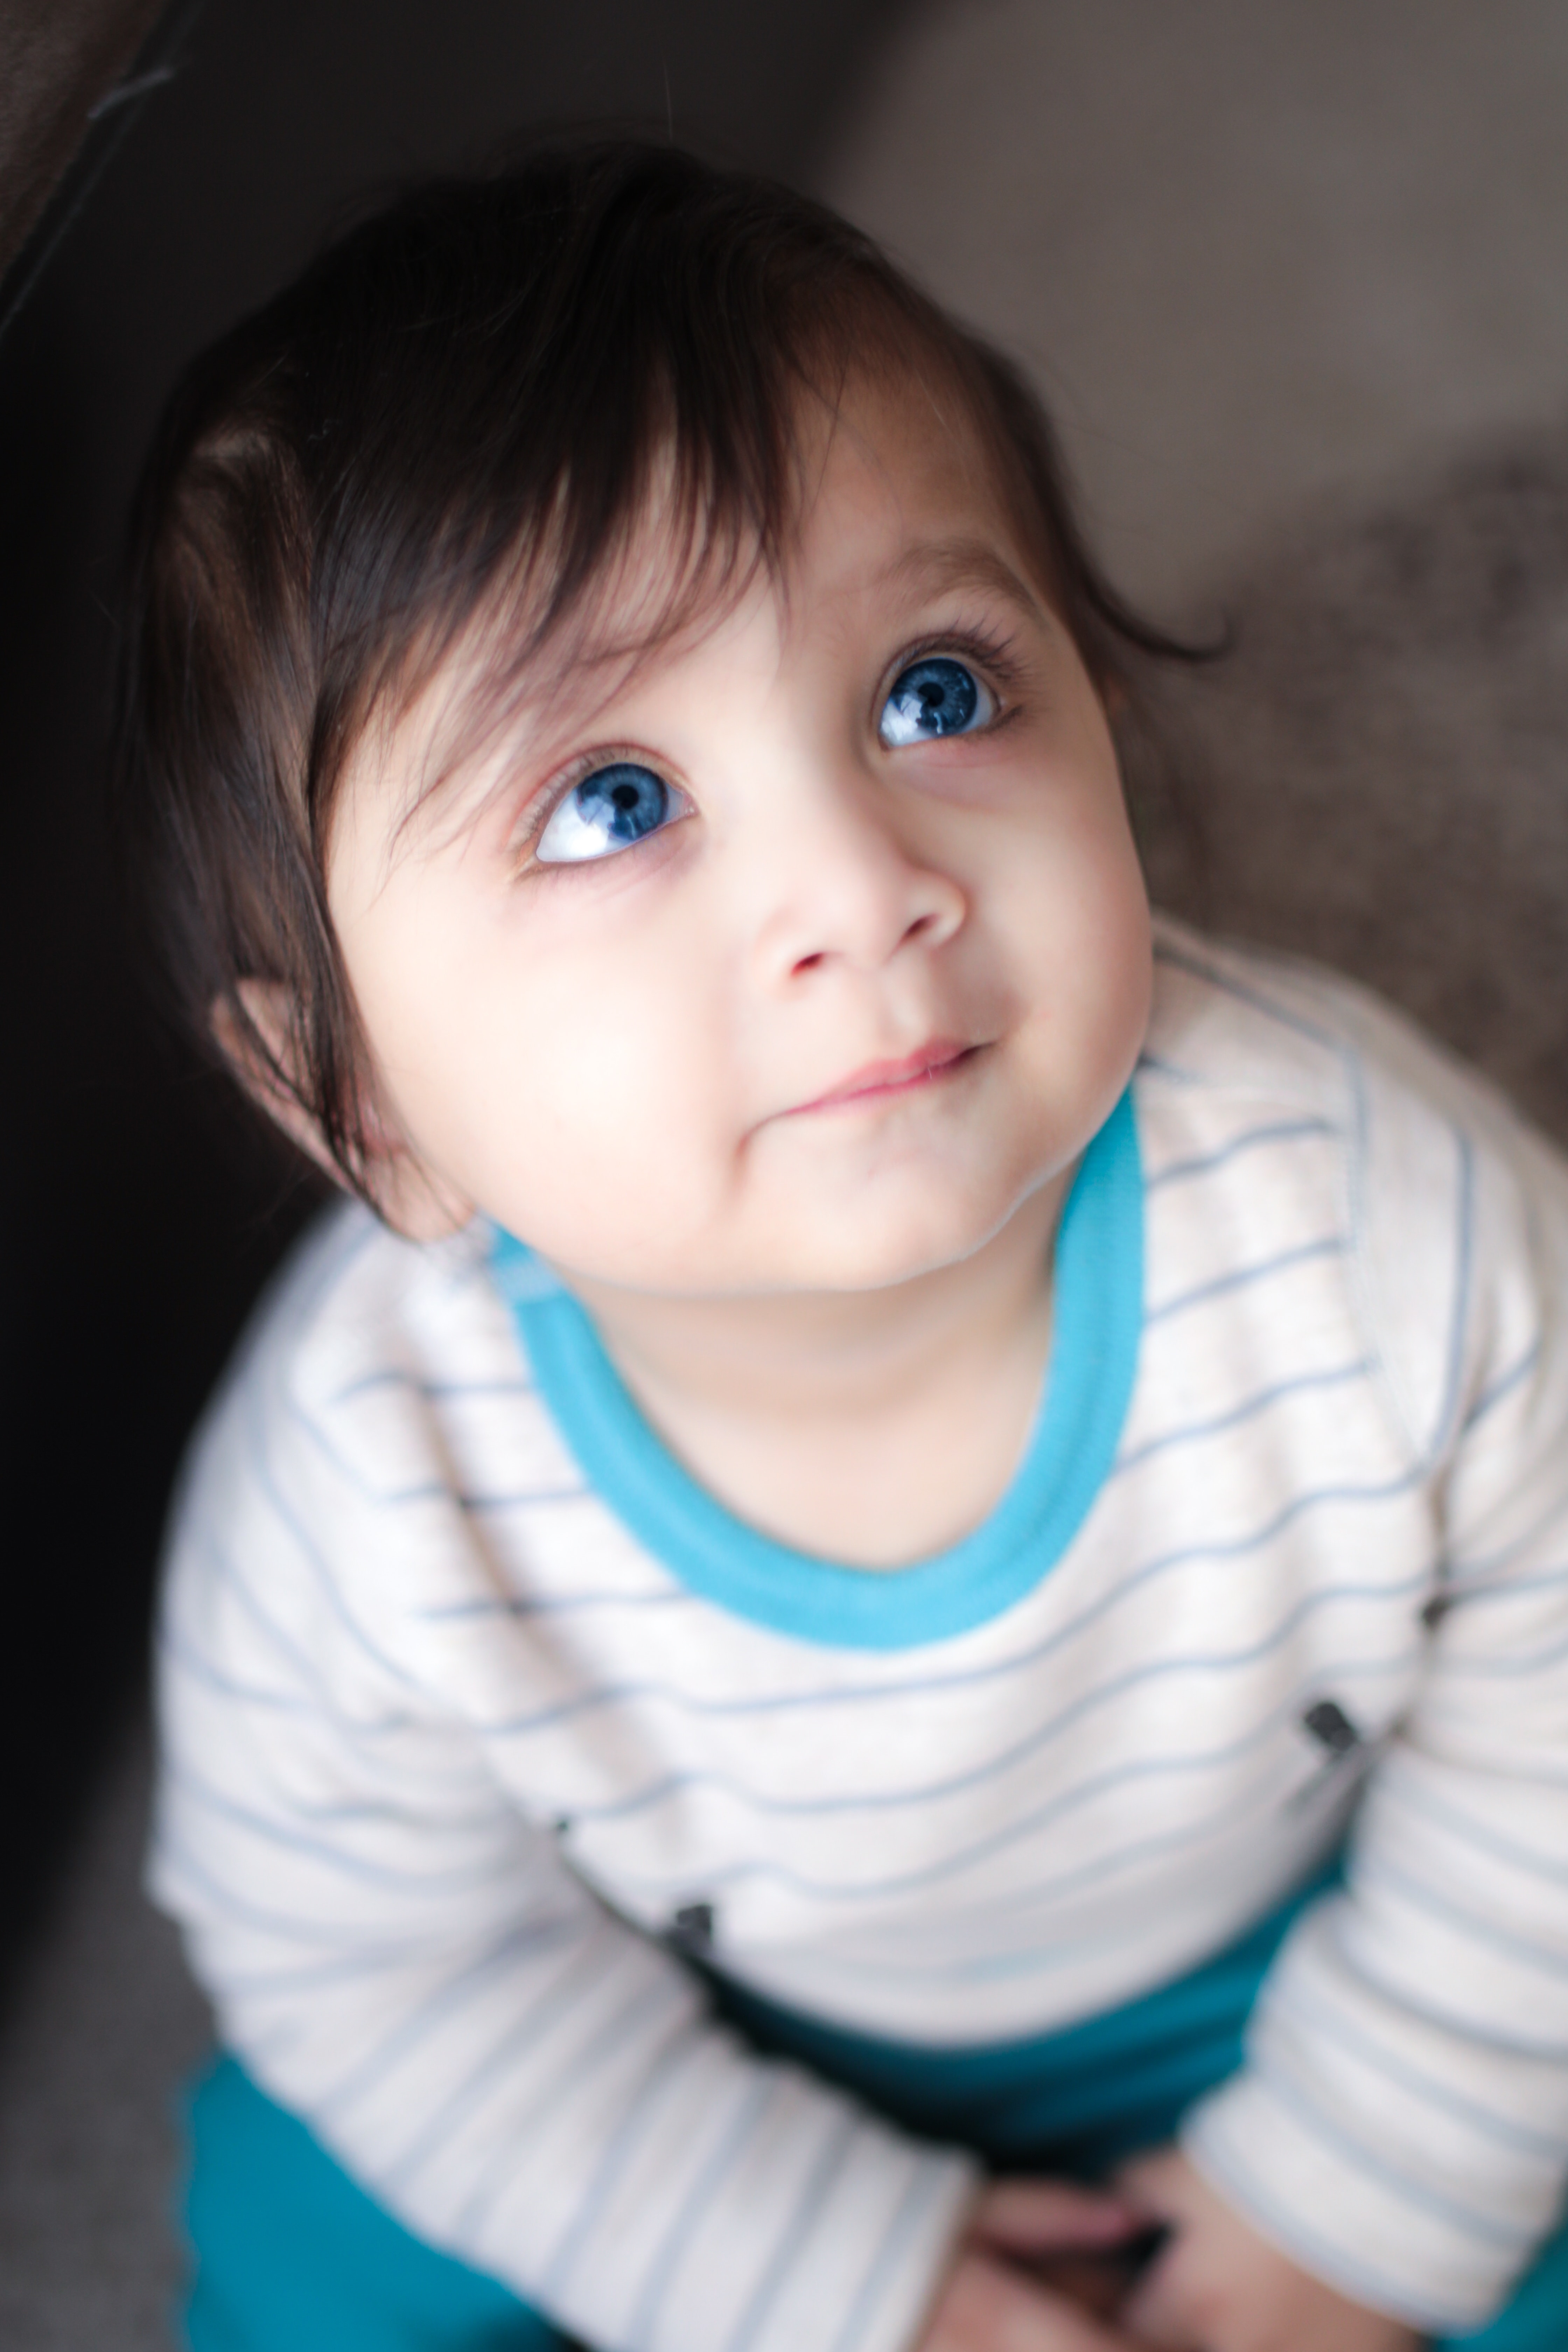 White and Blue Long-sleeves Striped Shirt, Innocence, Young, Toddler, Portrait, HQ Photo